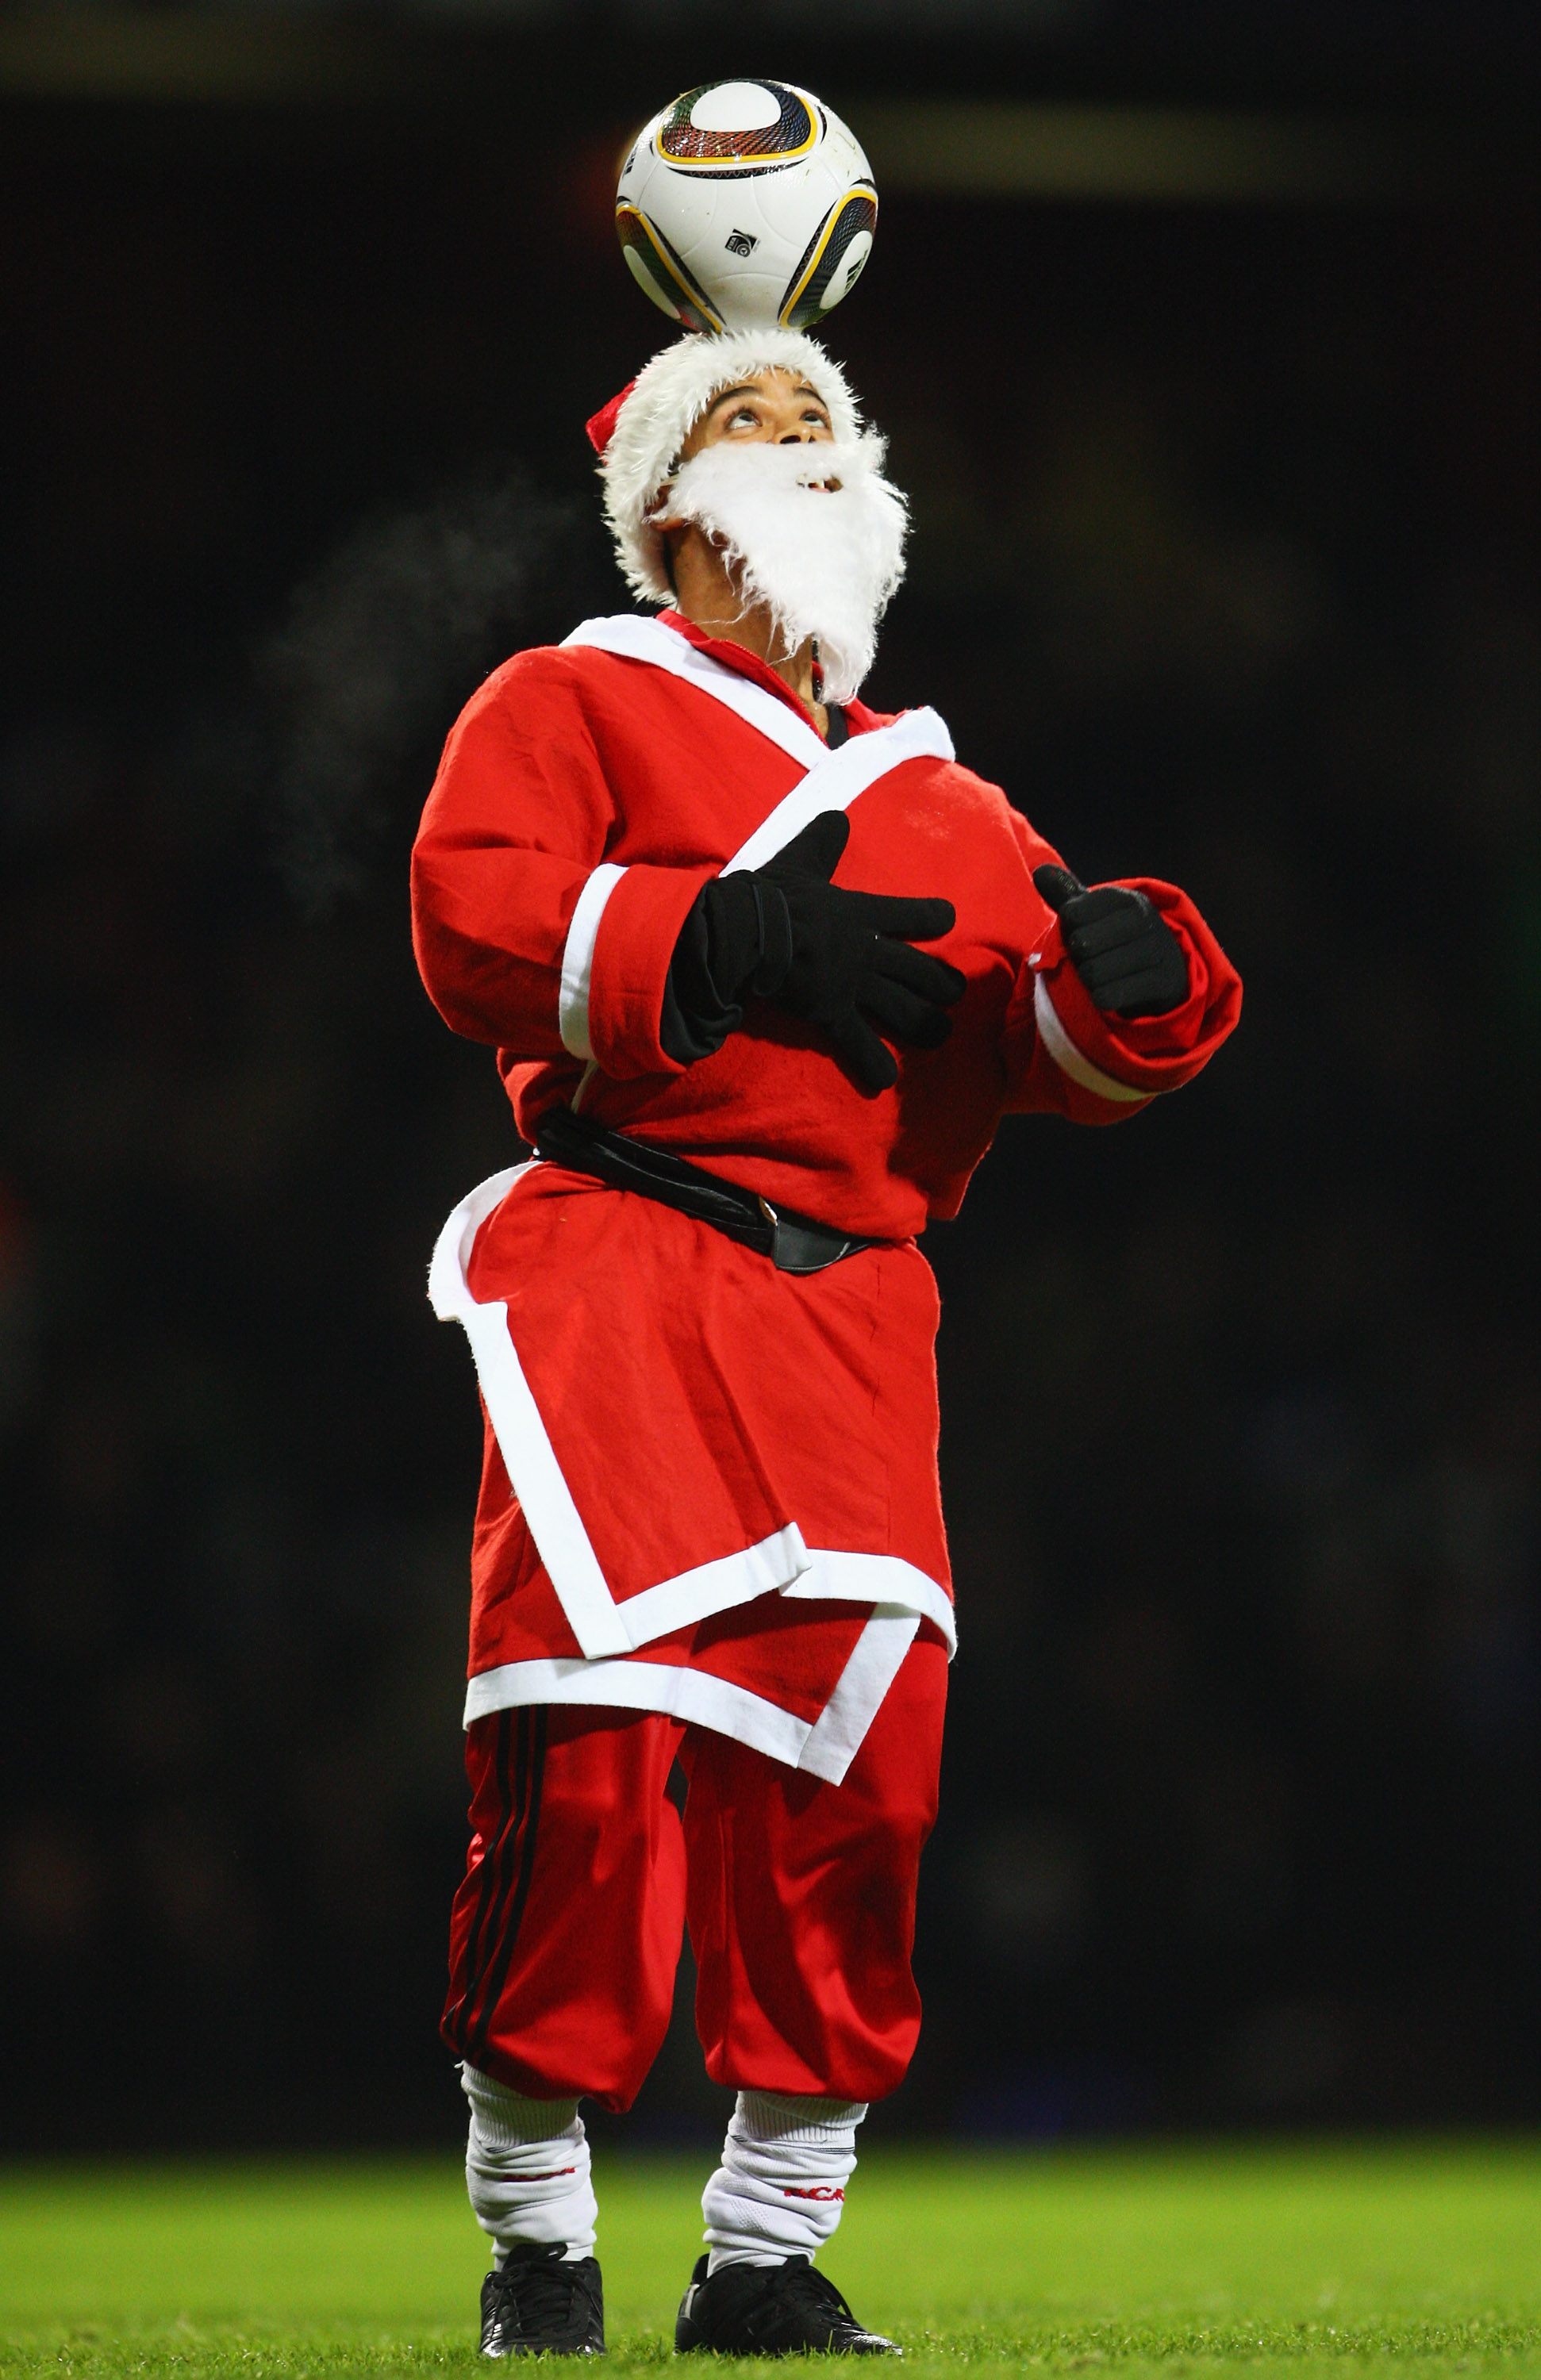 LONDON, ENGLAND - DECEMBER 20:  A ball juggler dressed as Father Christmas displays his skills at half time during the Barclays Premier League match between West Ham United and Chelsea at Upton Park on December 20, 2009 in London, England.  (Photo by Phil